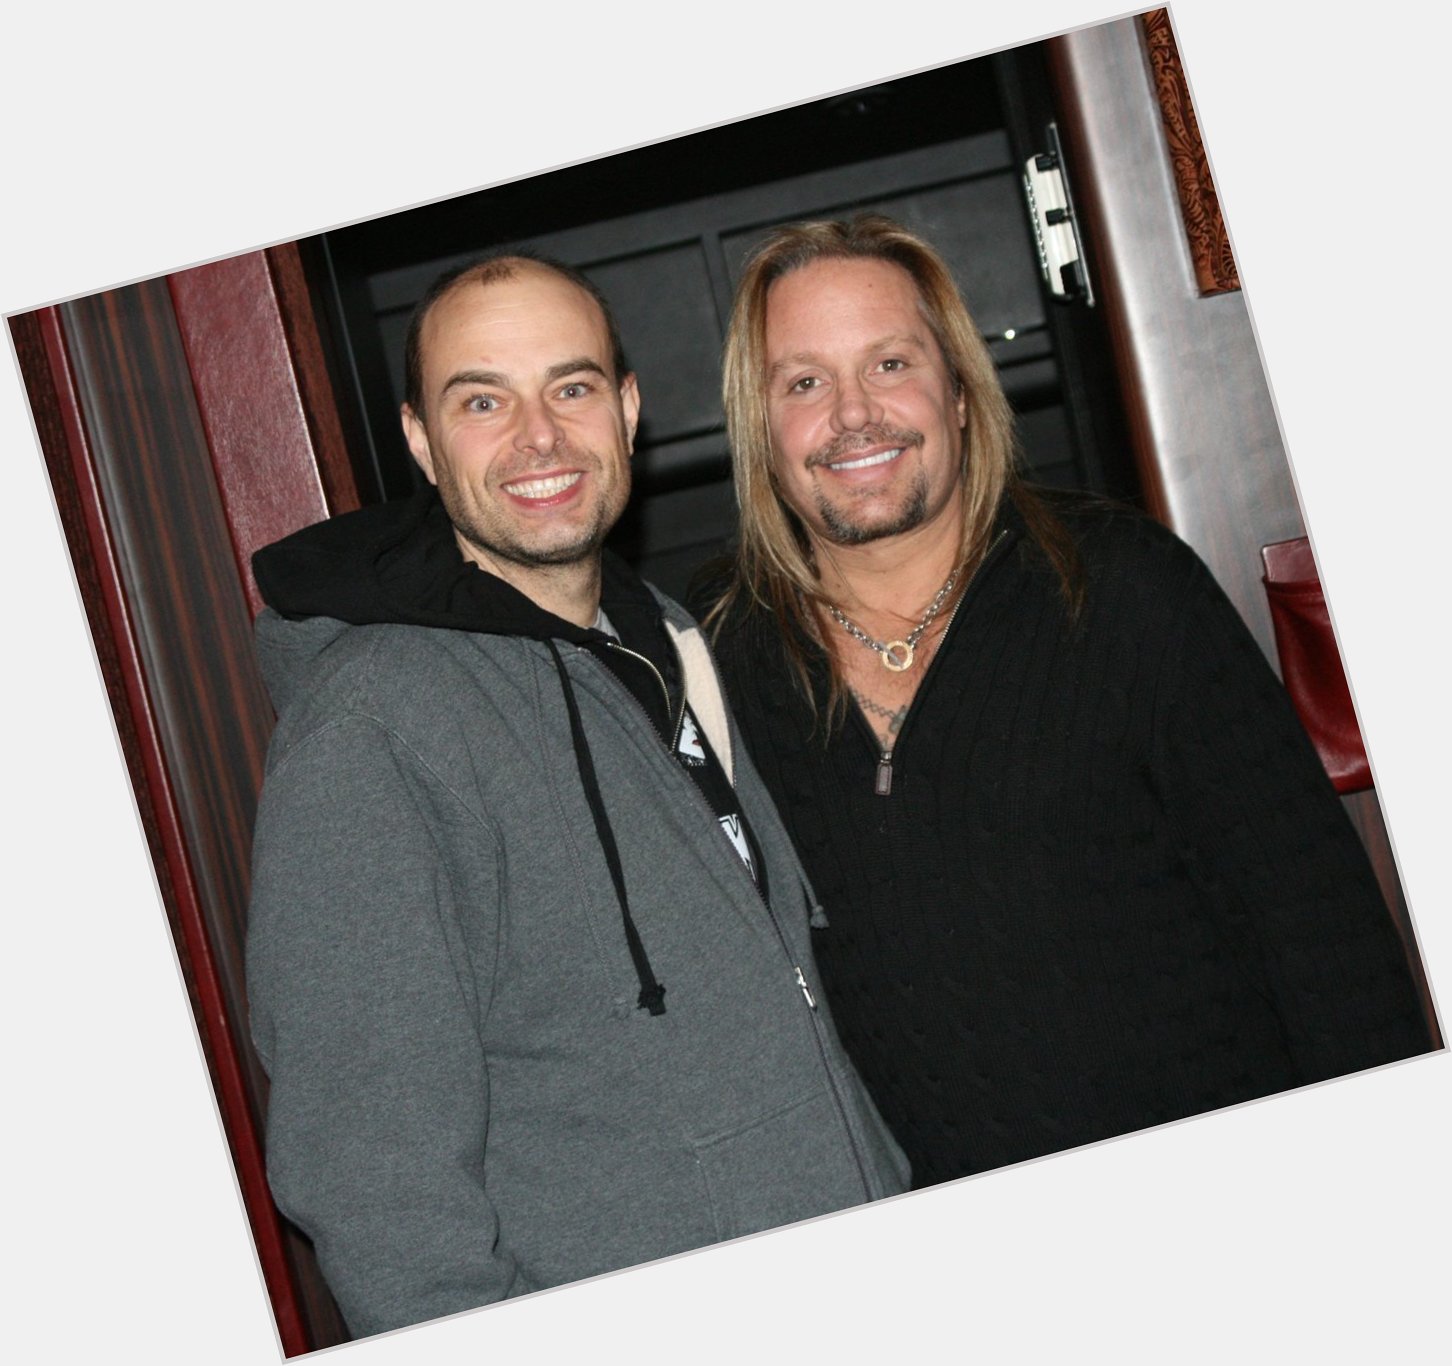 On This Day - Feb. 8th 1961. The voice of Mötley Crüe, Vince Neil, is born. Drop the mic... happy birthday Vince! 